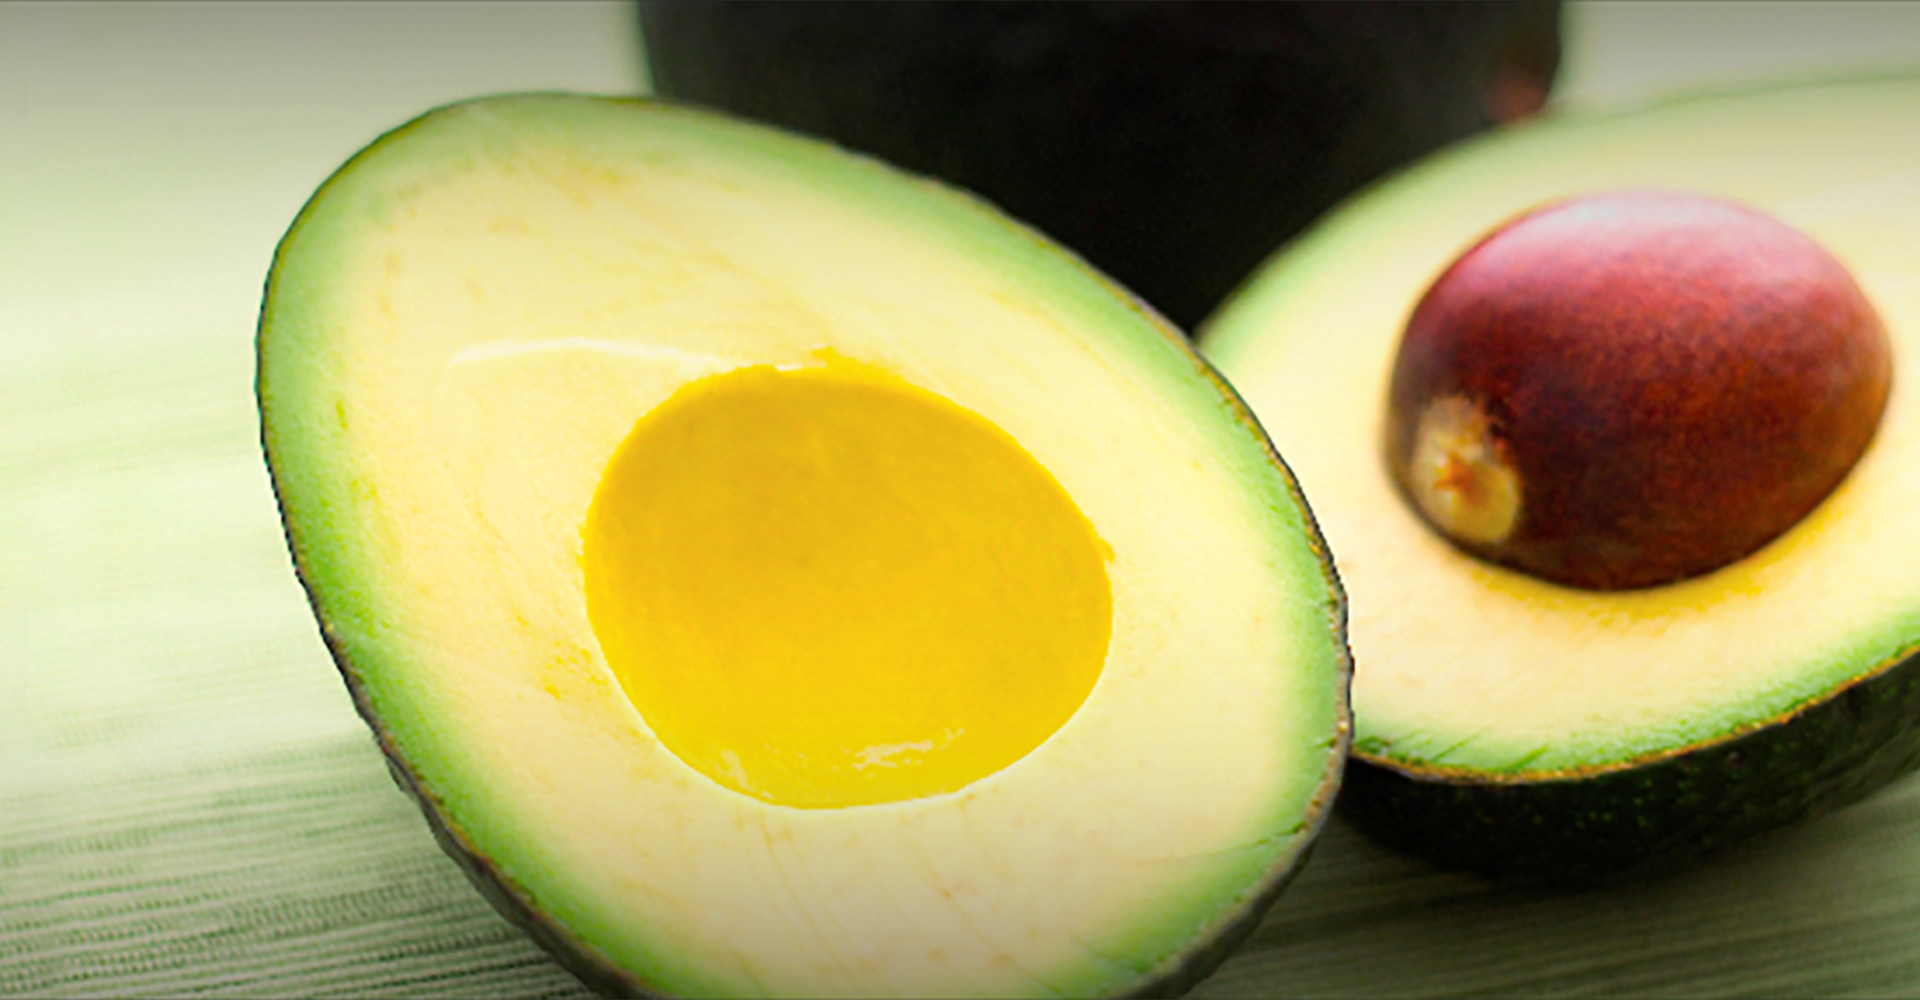 About Us & Our Ahuacatlan Avocado Oil